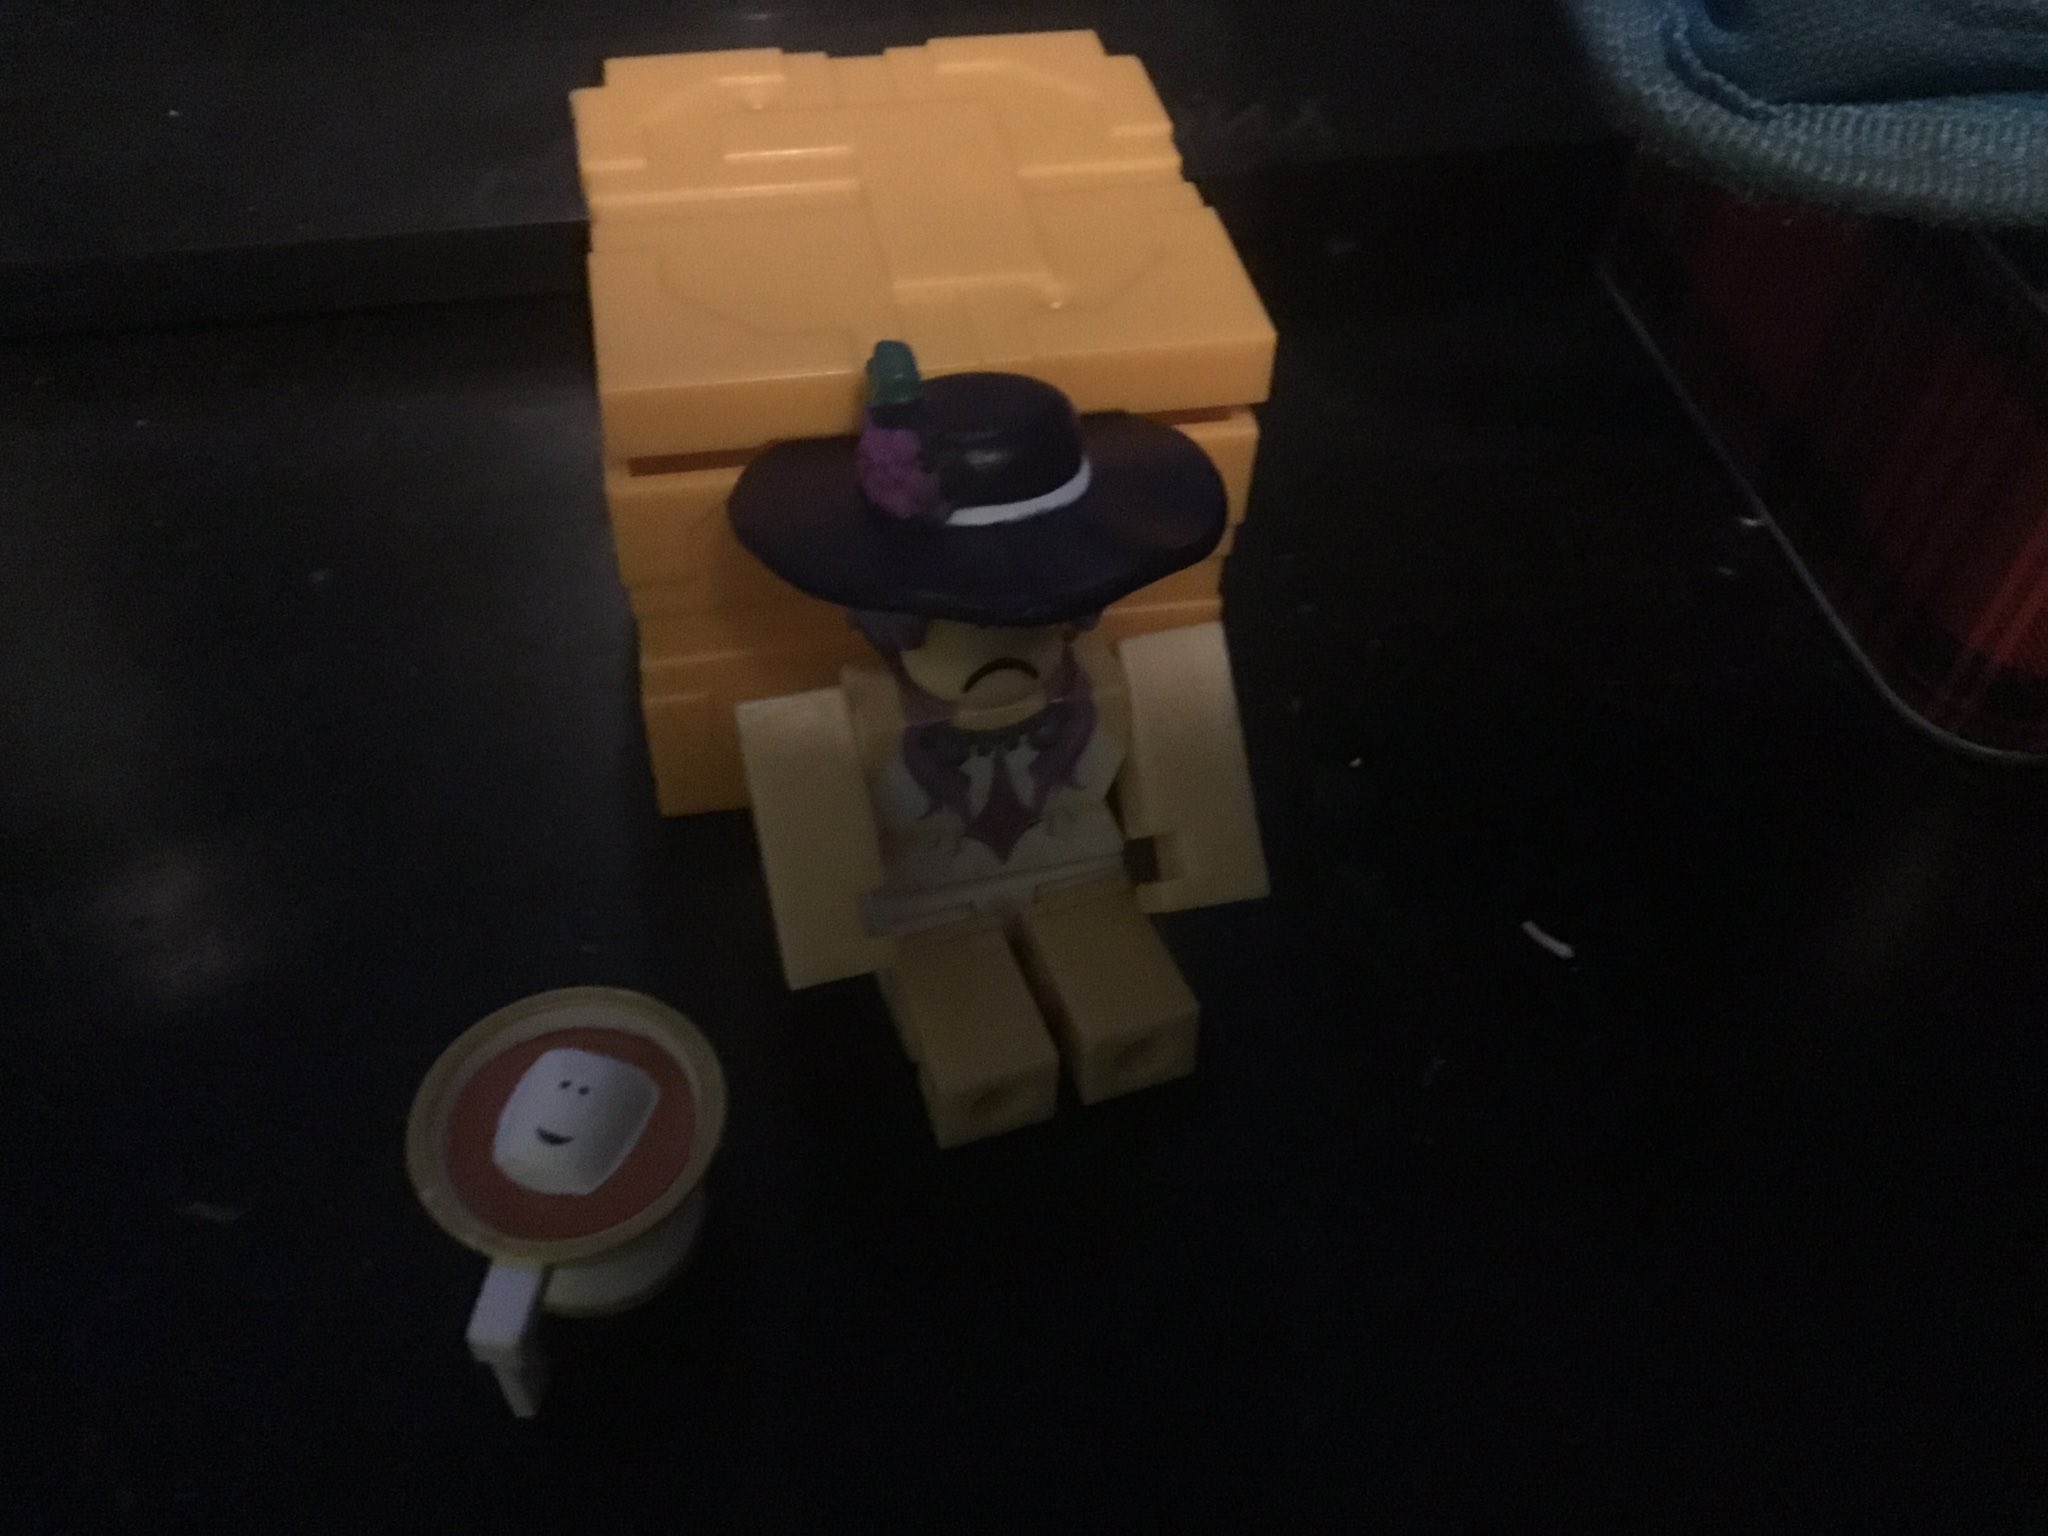 Br Onze On Twitter This Is What I Got From A Roblox Toy - roblox titanic socialite